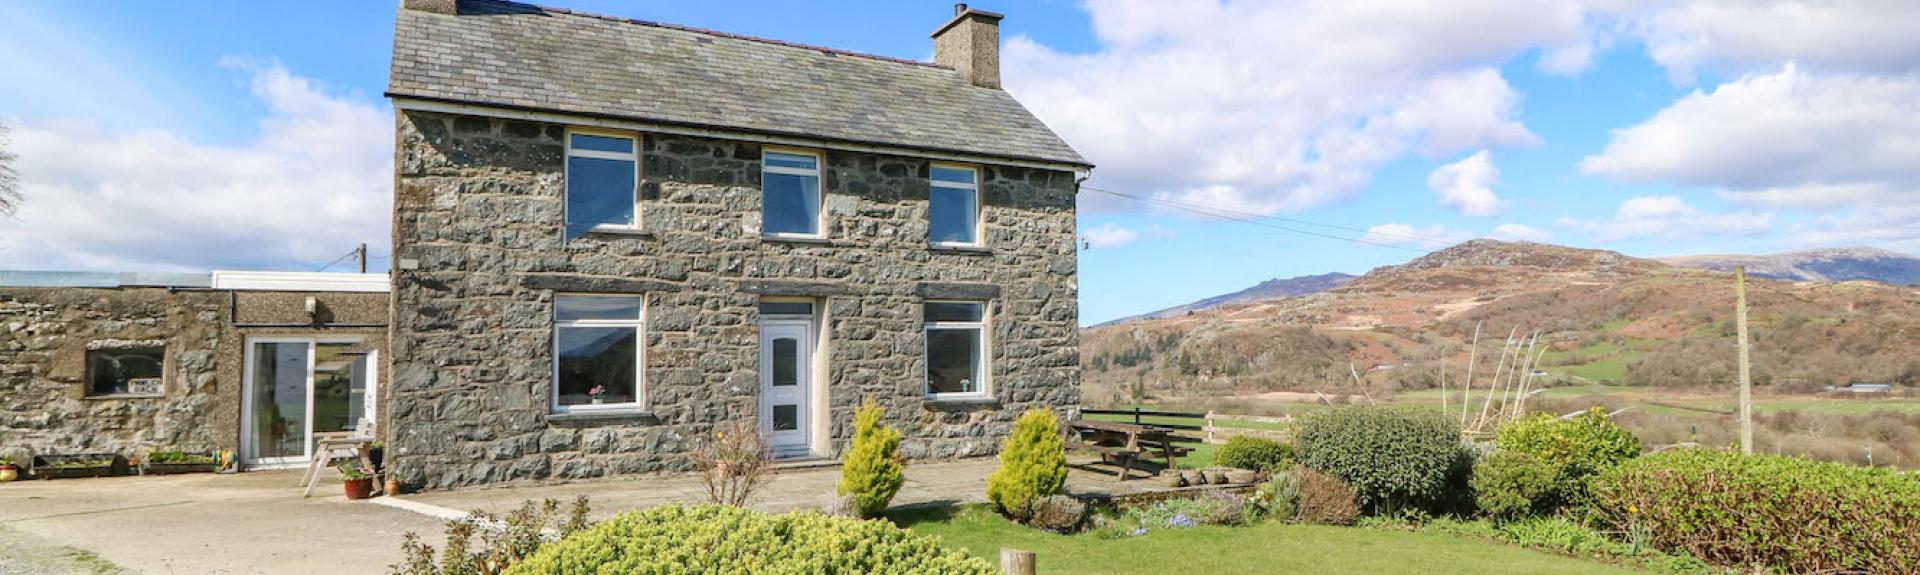 A detached, doubled-froted stone-built house with a slate roof with a slate roof, large lawned garden and views of Snowdonia/